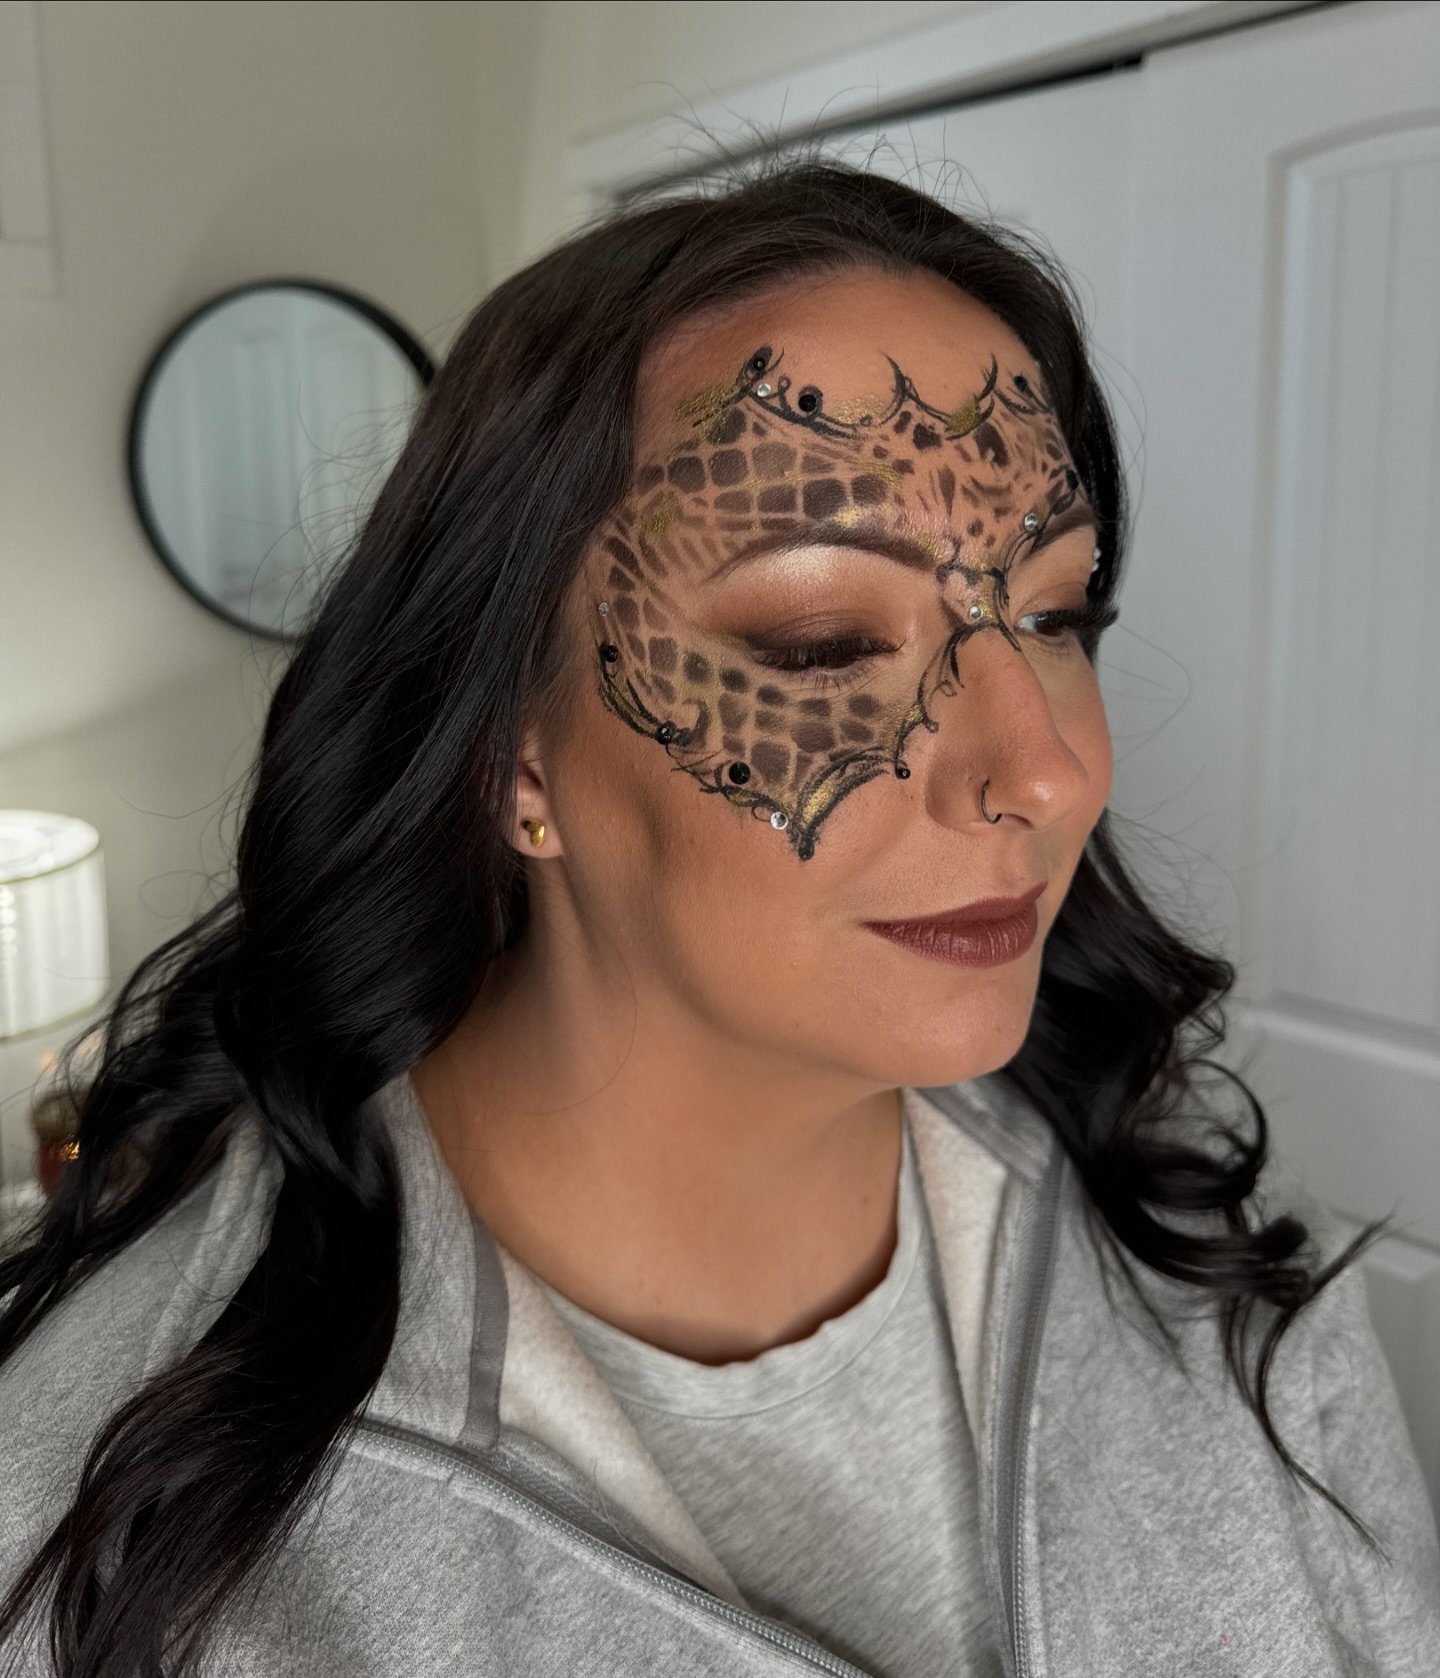 Masquerade Ball Ready. Sometimes it is easier to get a mask drawn on your face for the event while adding some curls to finish off the look. 

Half Mask look with gold touches and gems with perfect soft curls. 

#makeupartist #makeupartistfsj #makeup